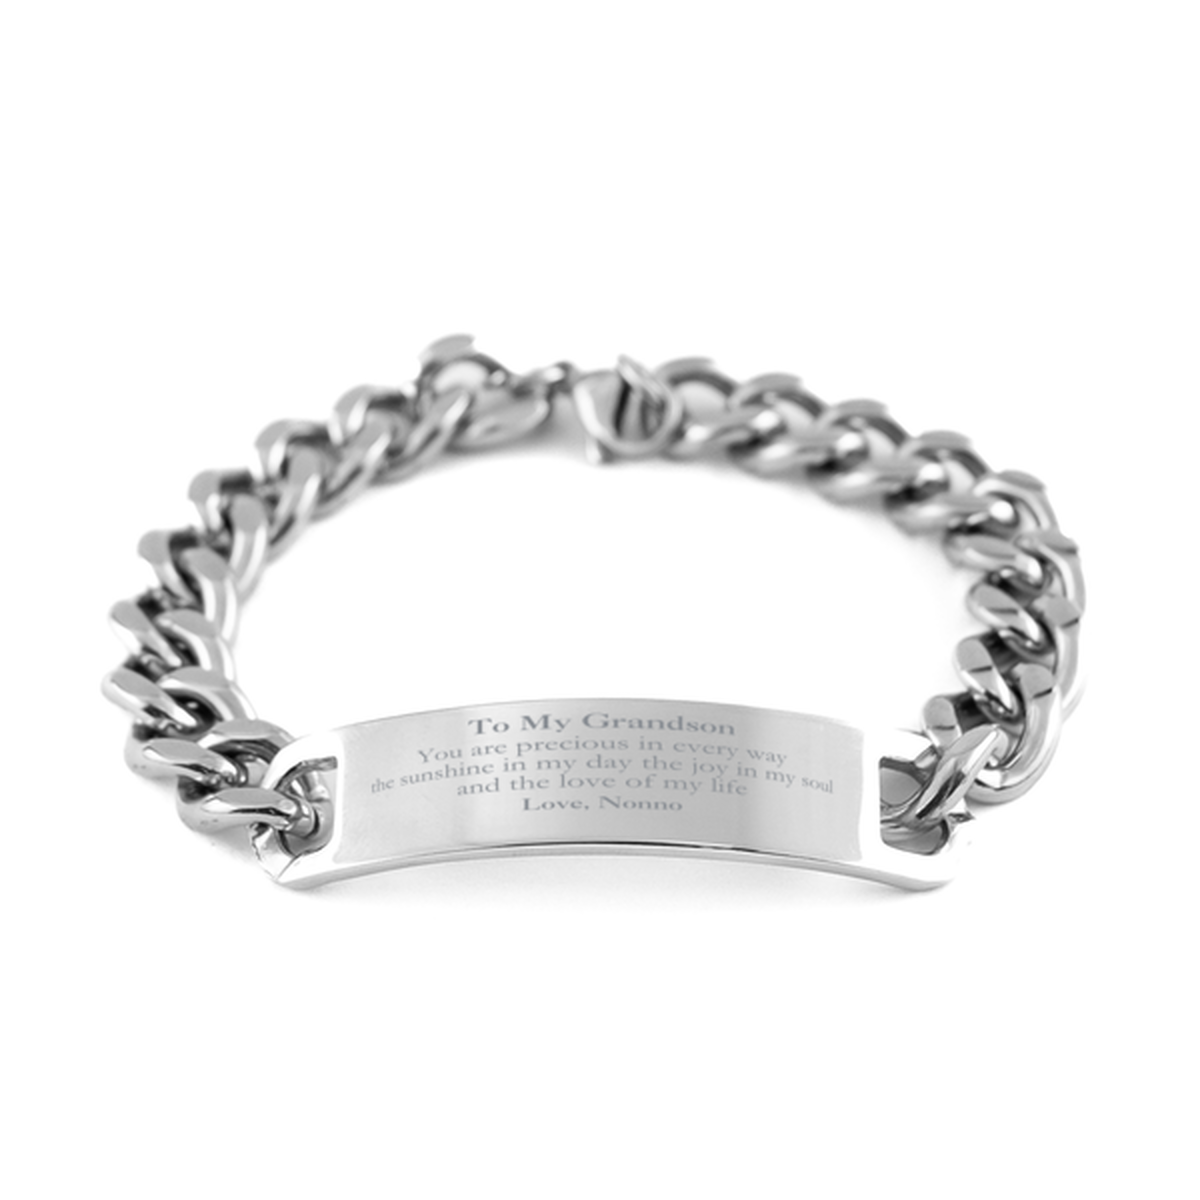 Graduation Gifts for Grandson Cuban Chain Stainless Steel Bracelet Present from Nonno, Christmas Grandson Birthday Gifts Grandson You are precious in every way the sunshine in my day. Love, Nonno